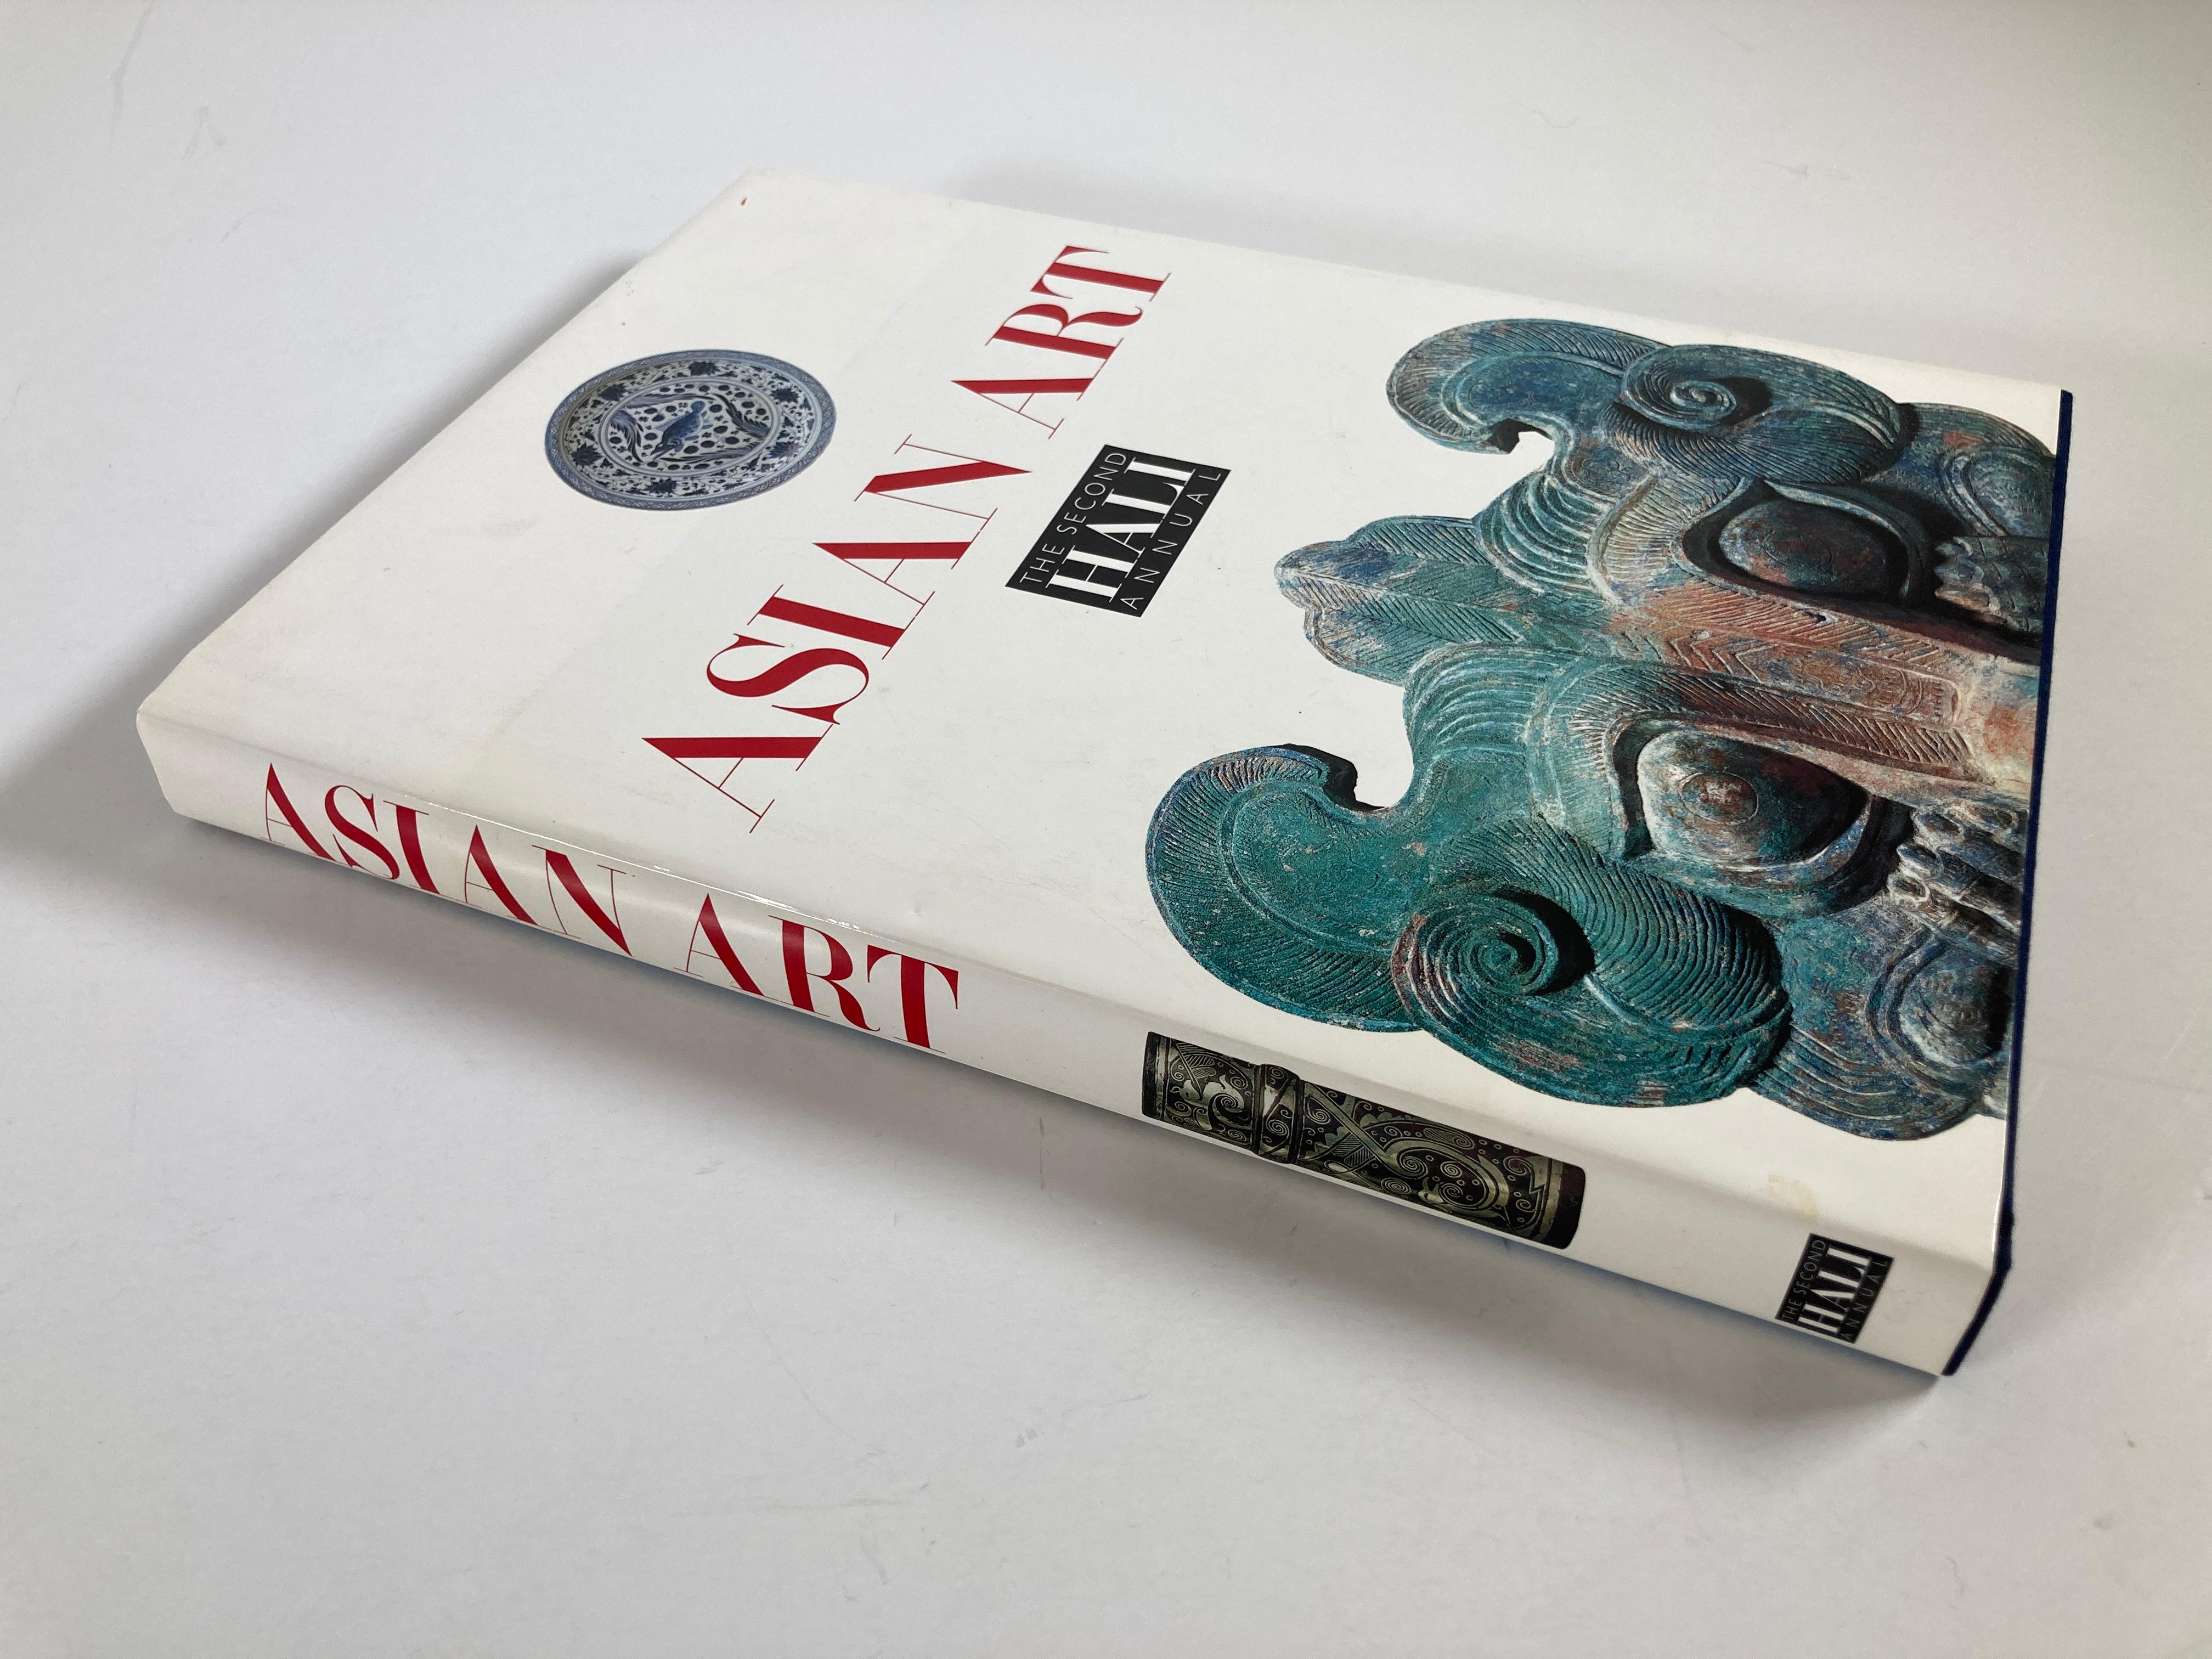 ASIAN ART. The Second Hali Annual
By (Tilden, Jill; Editor)
Hardcover· 224 page
